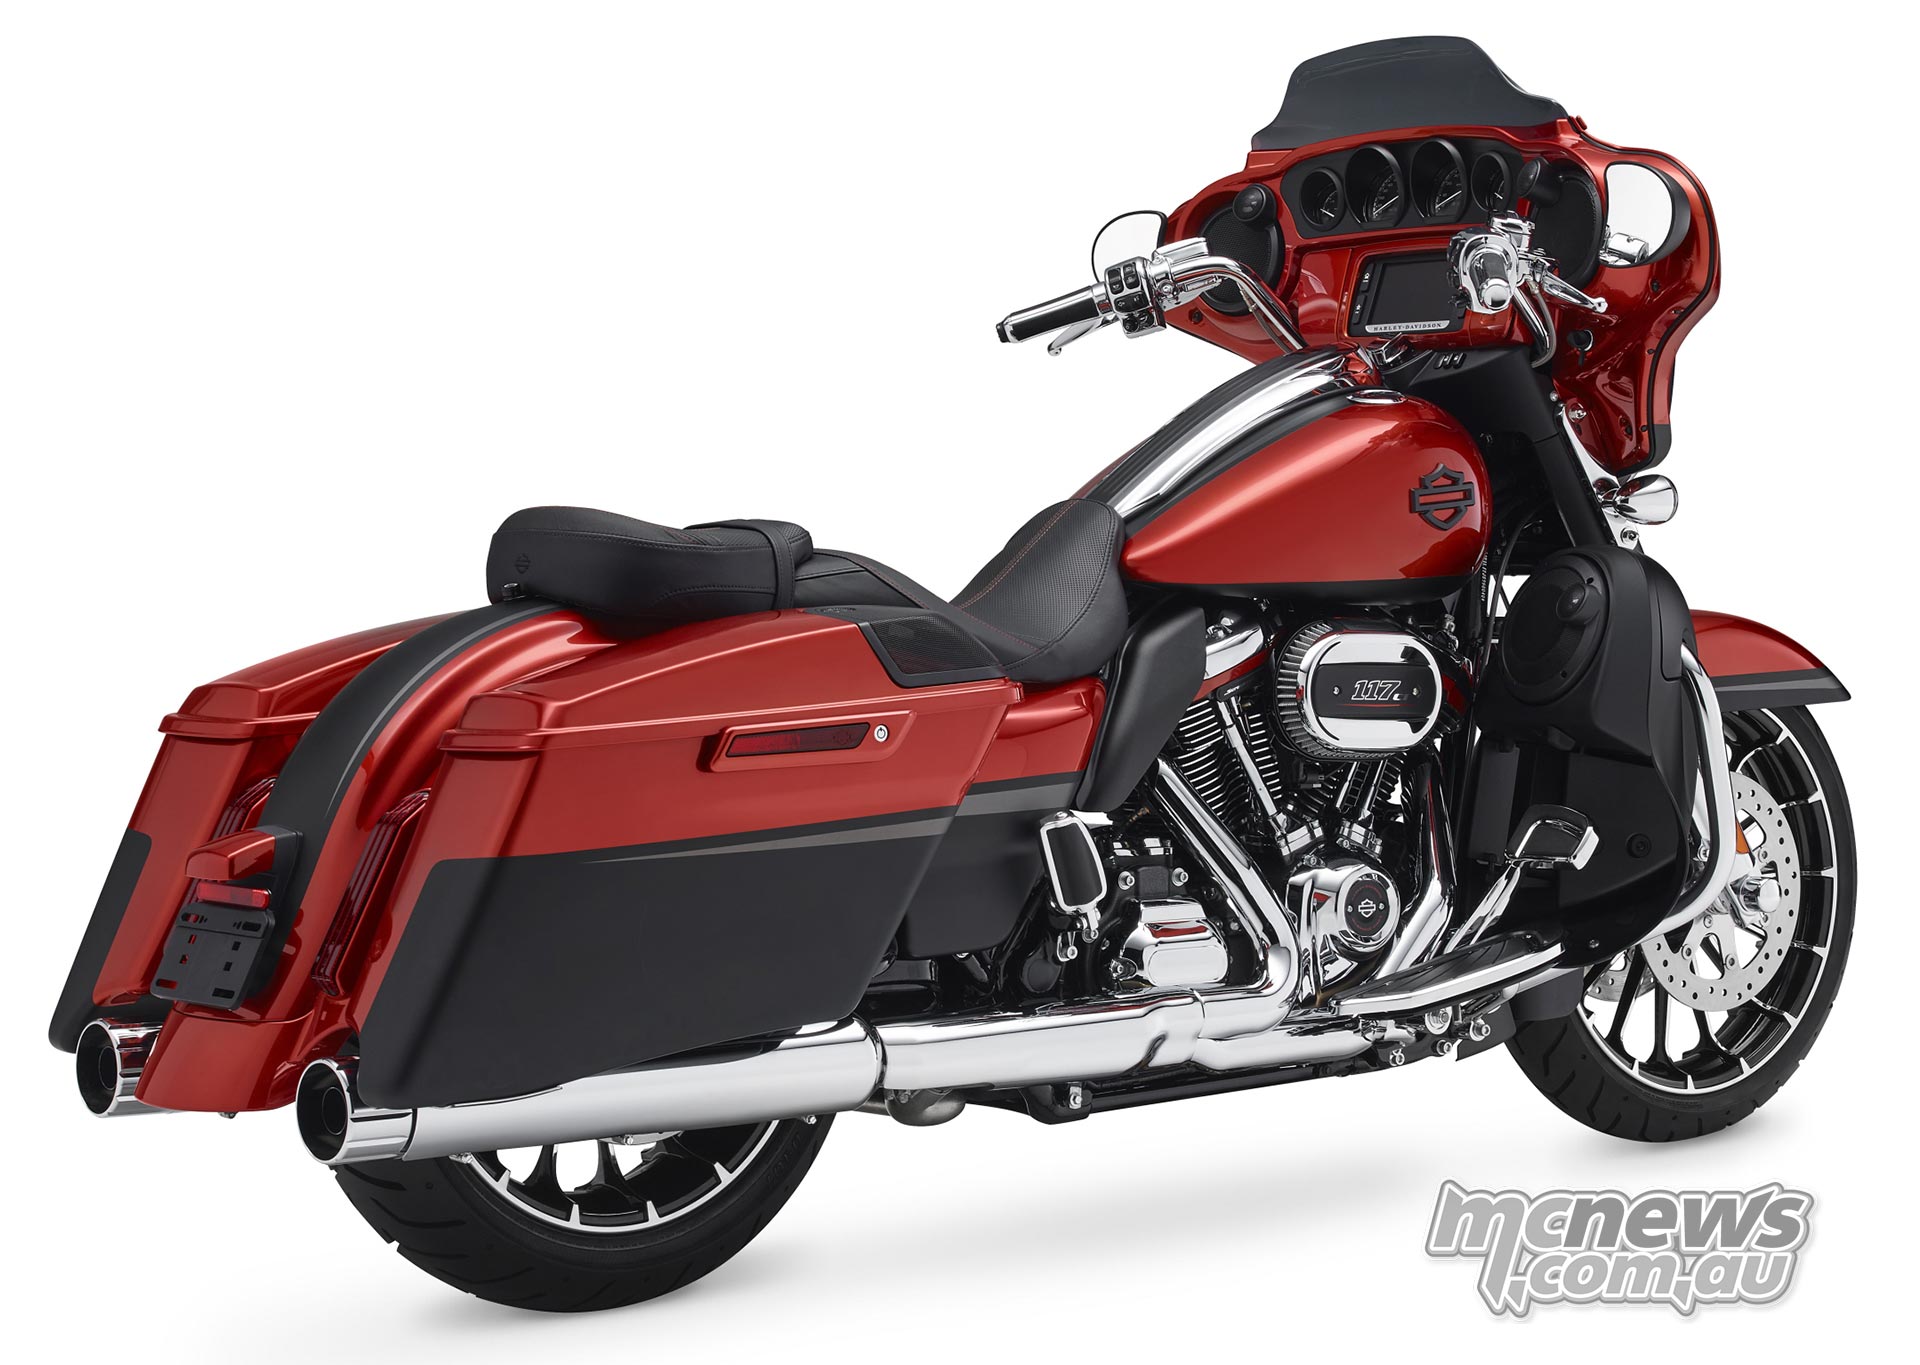 Cvo Tourers And Specials Top 2018 Harley Range Mcnews